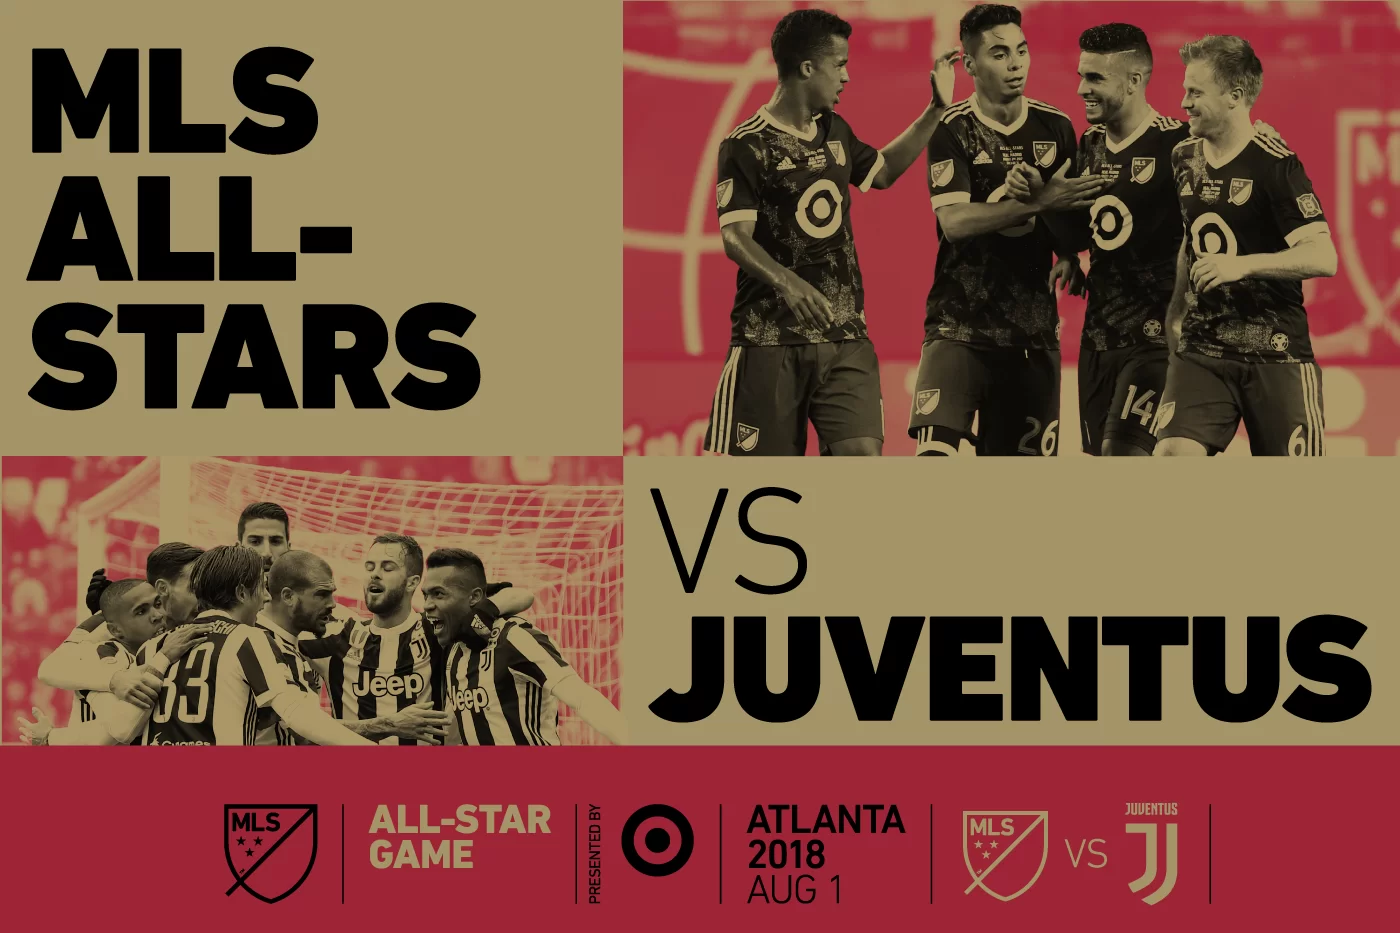 MLS All-Star-Juventus 1-1 (Finale 4-6 dcr): il resoconto